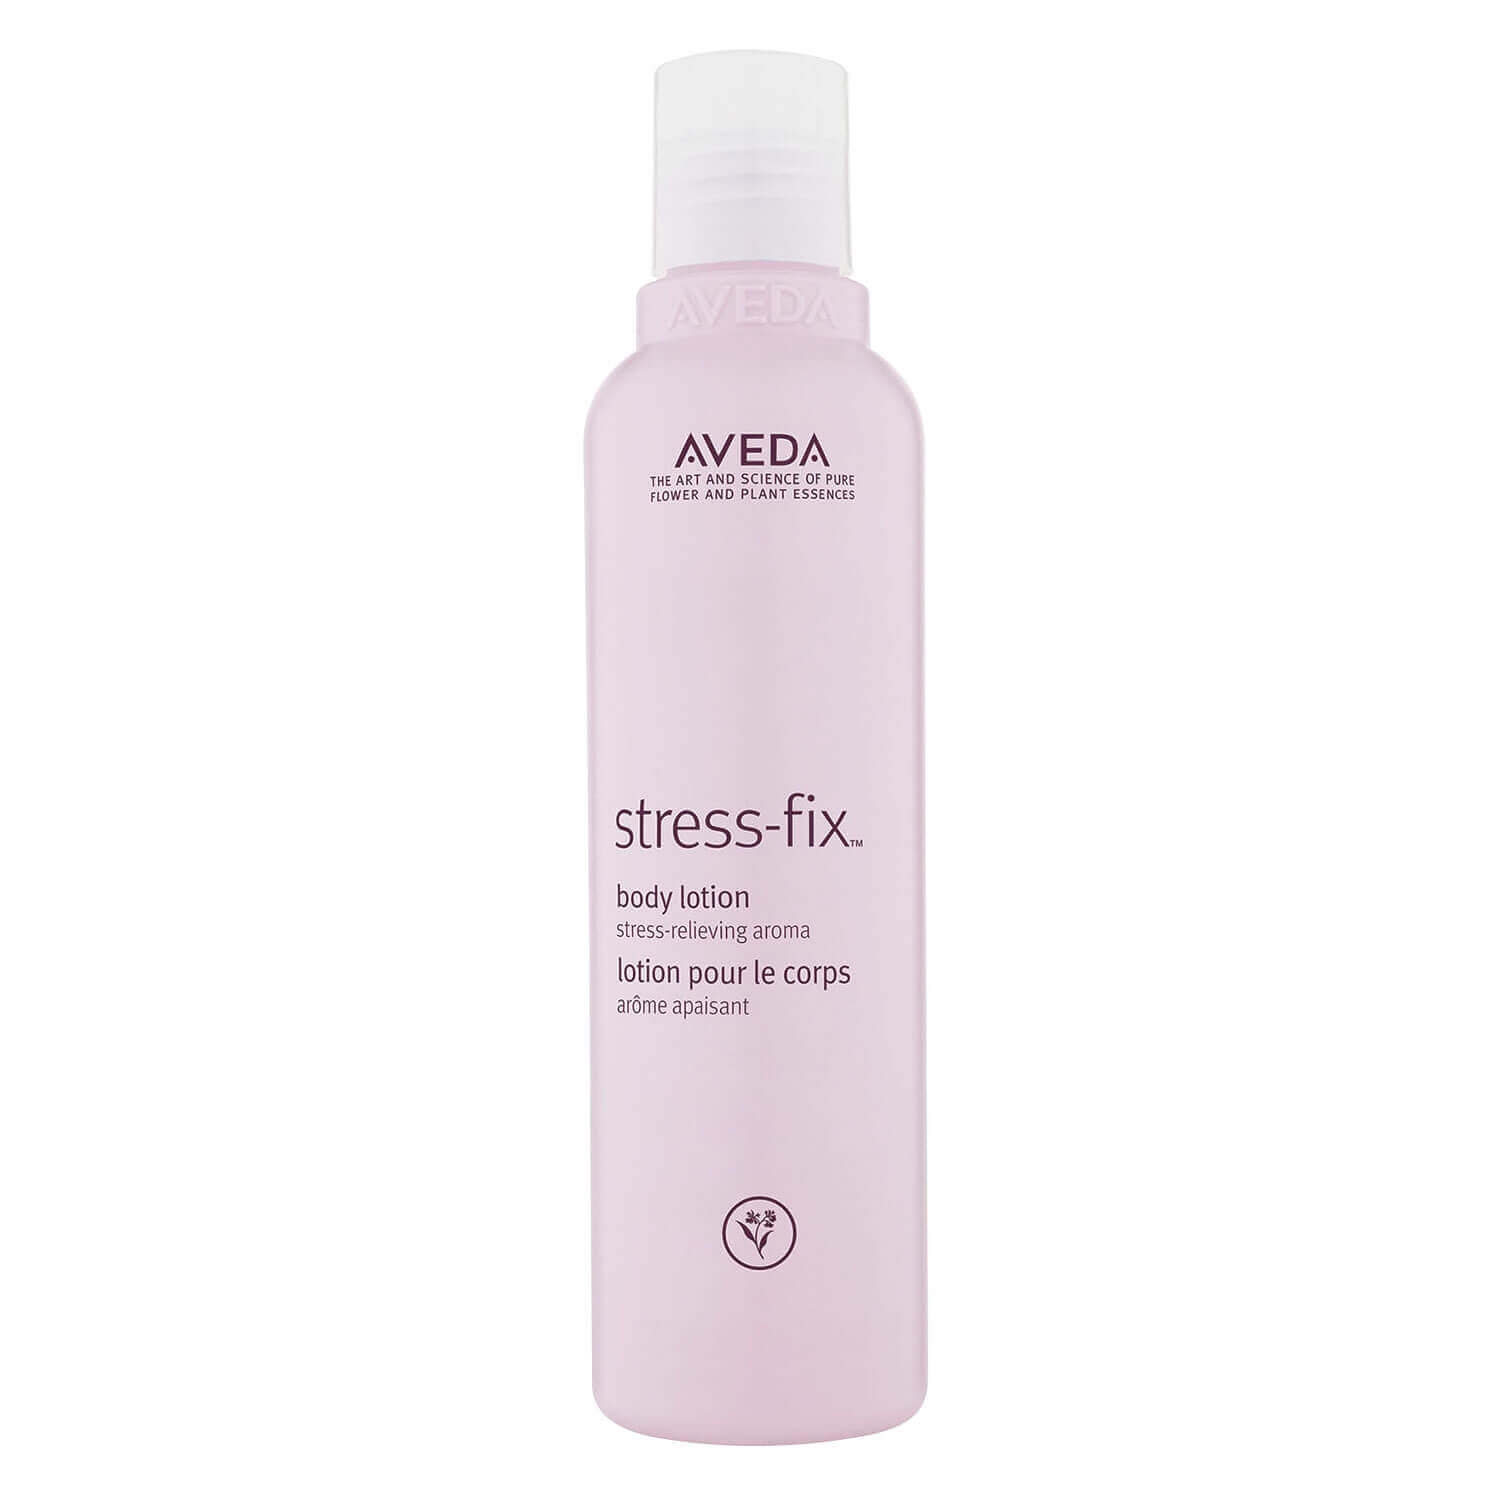 Product image from stress-fix - body lotion